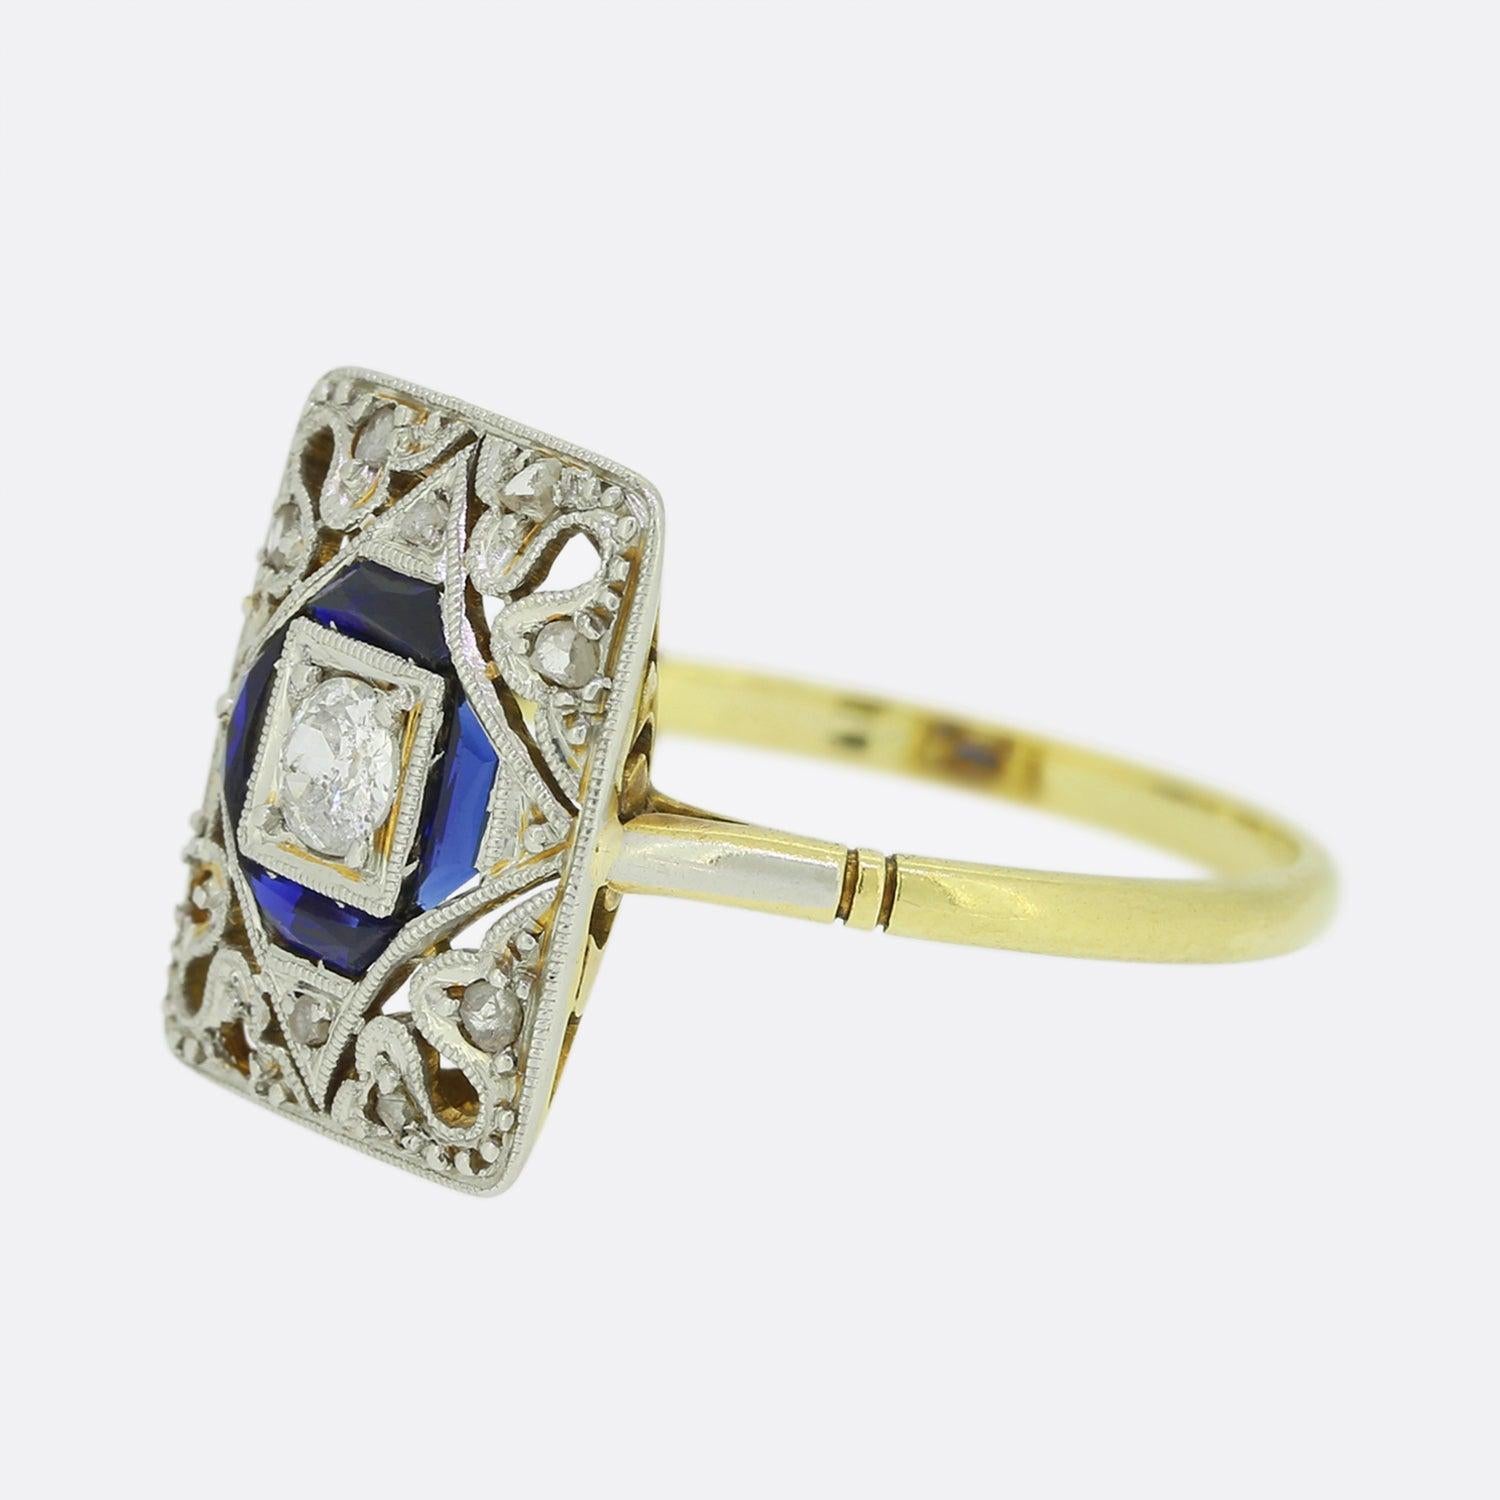 This is a wonderful Art Deco sapphire and diamond tablet ring. The ring showcases a central old European cut diamond that is surrounded by a border of trapezoid cut sapphires. The ring has been crafted in a rectangular shaped tablet setting crafted